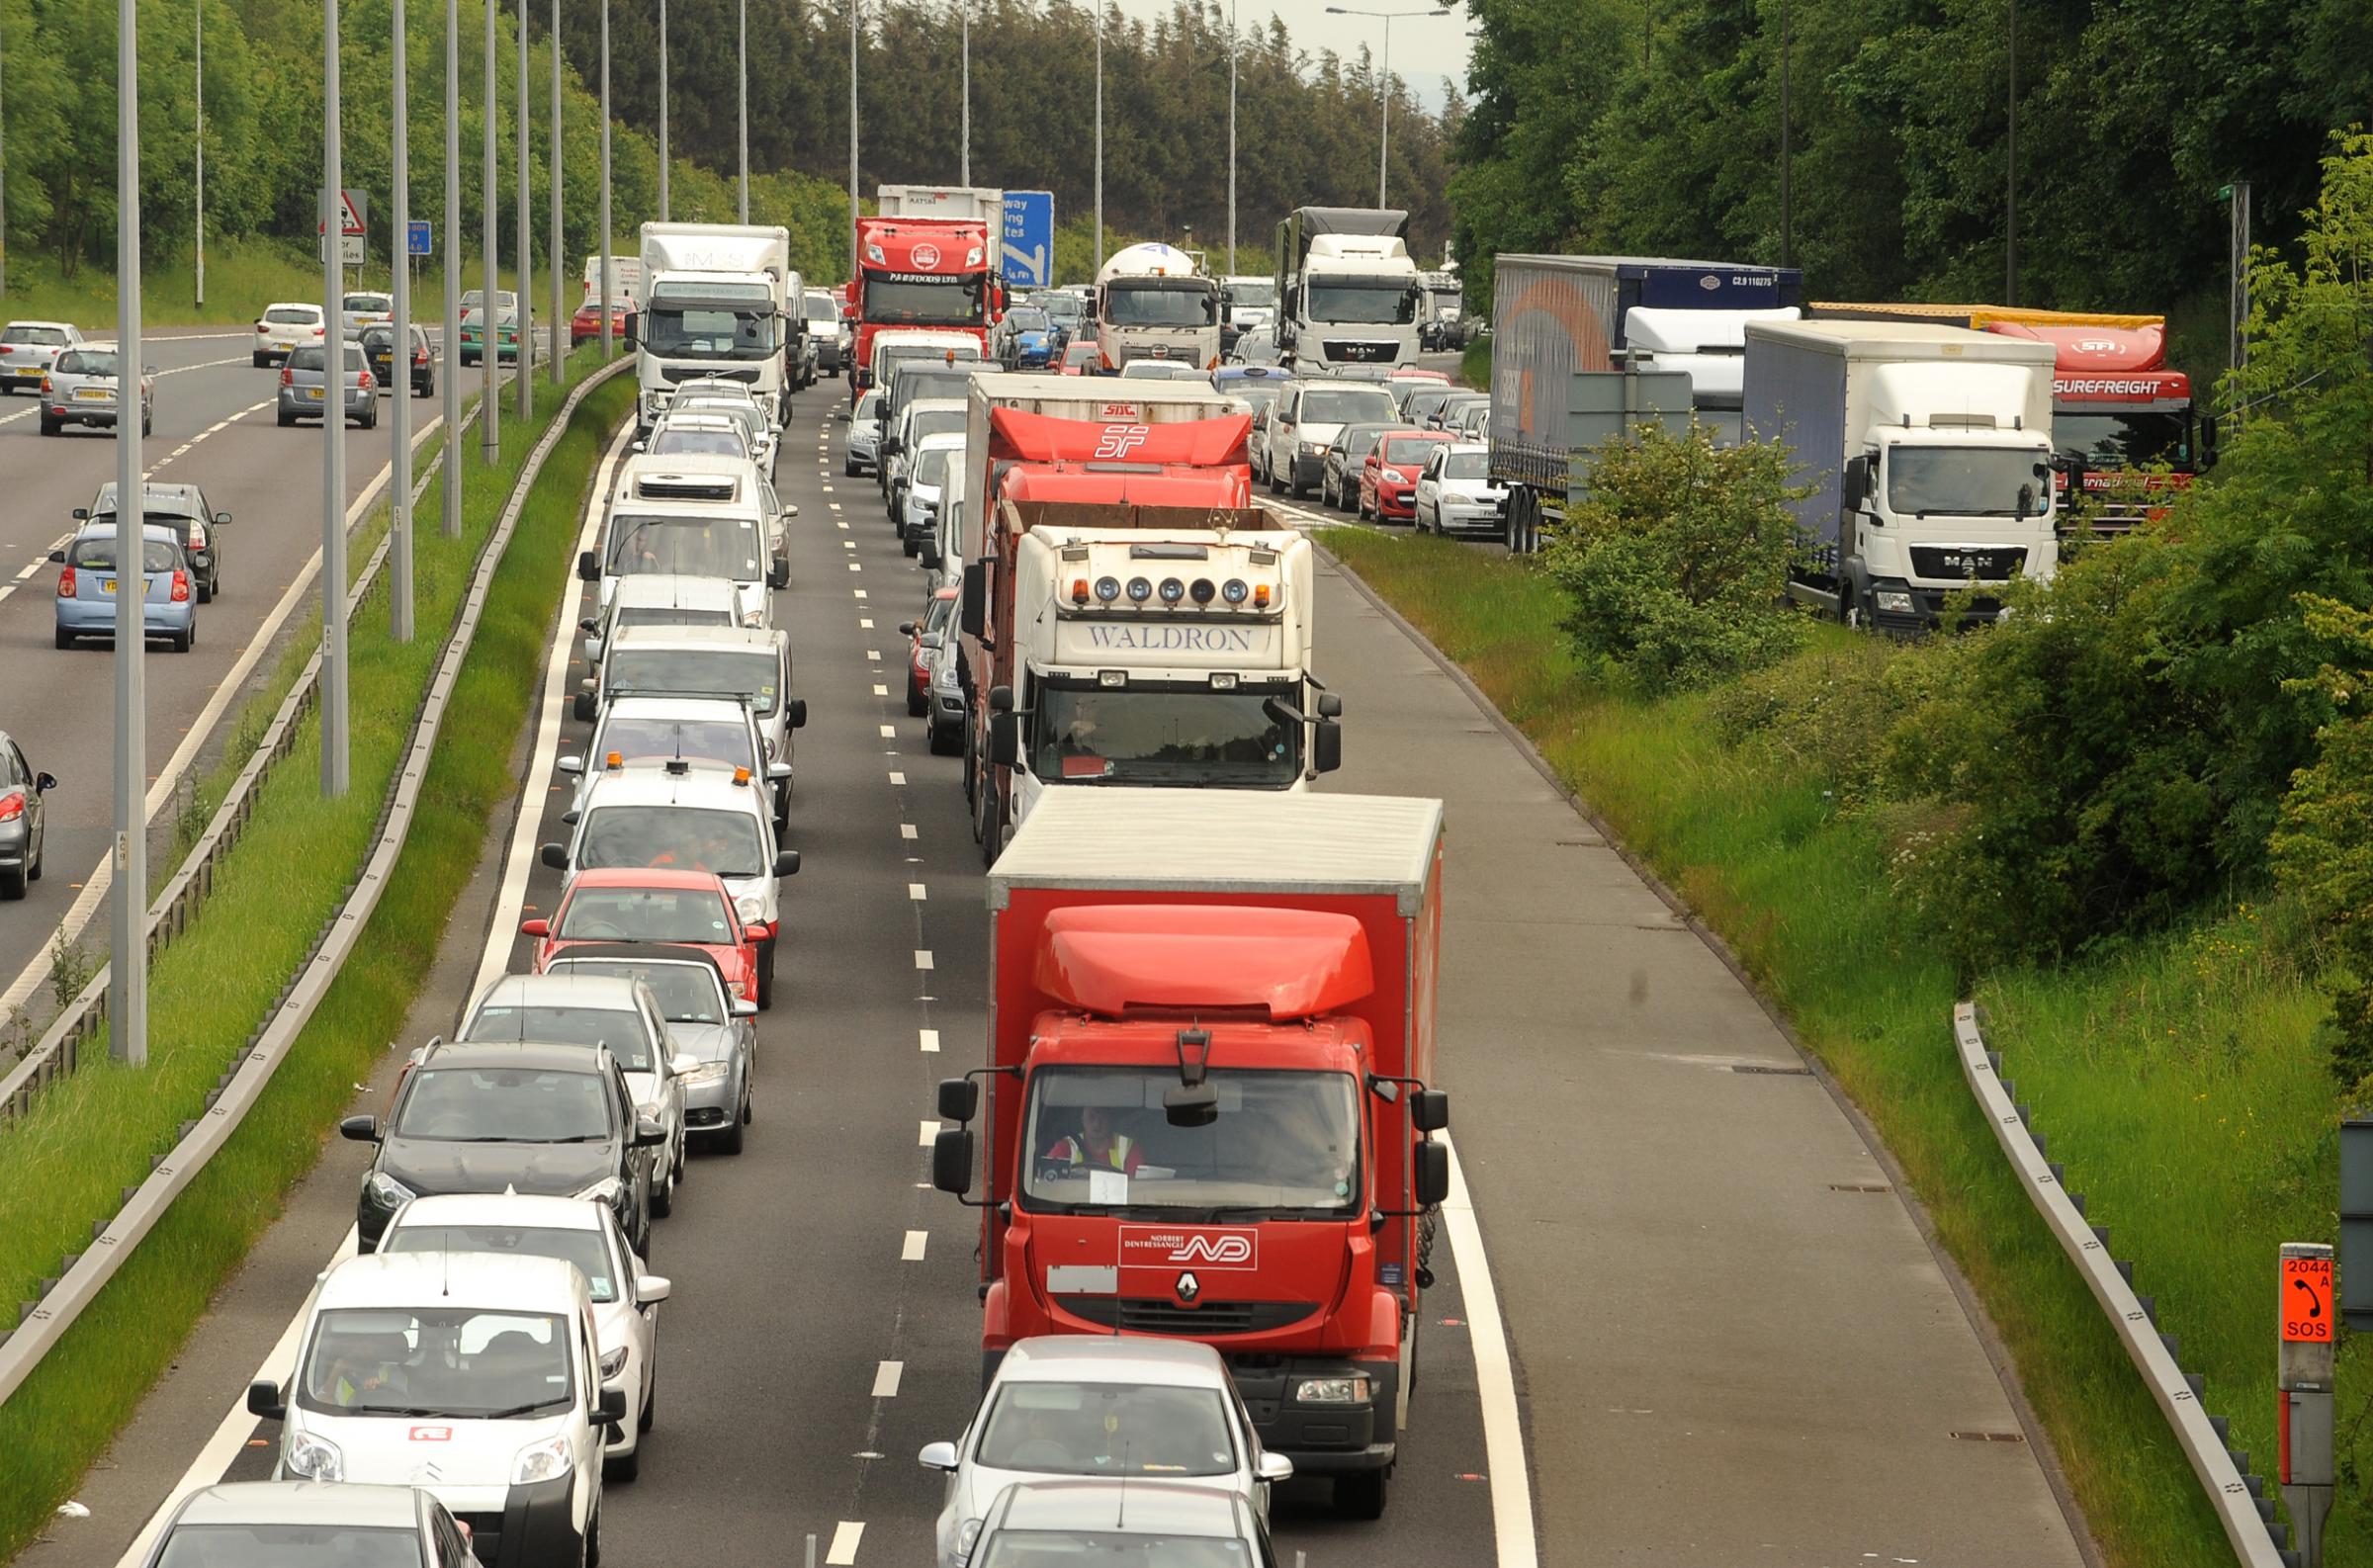 Planned roadworks on Bradford's M606 expected to cause delays - what we know